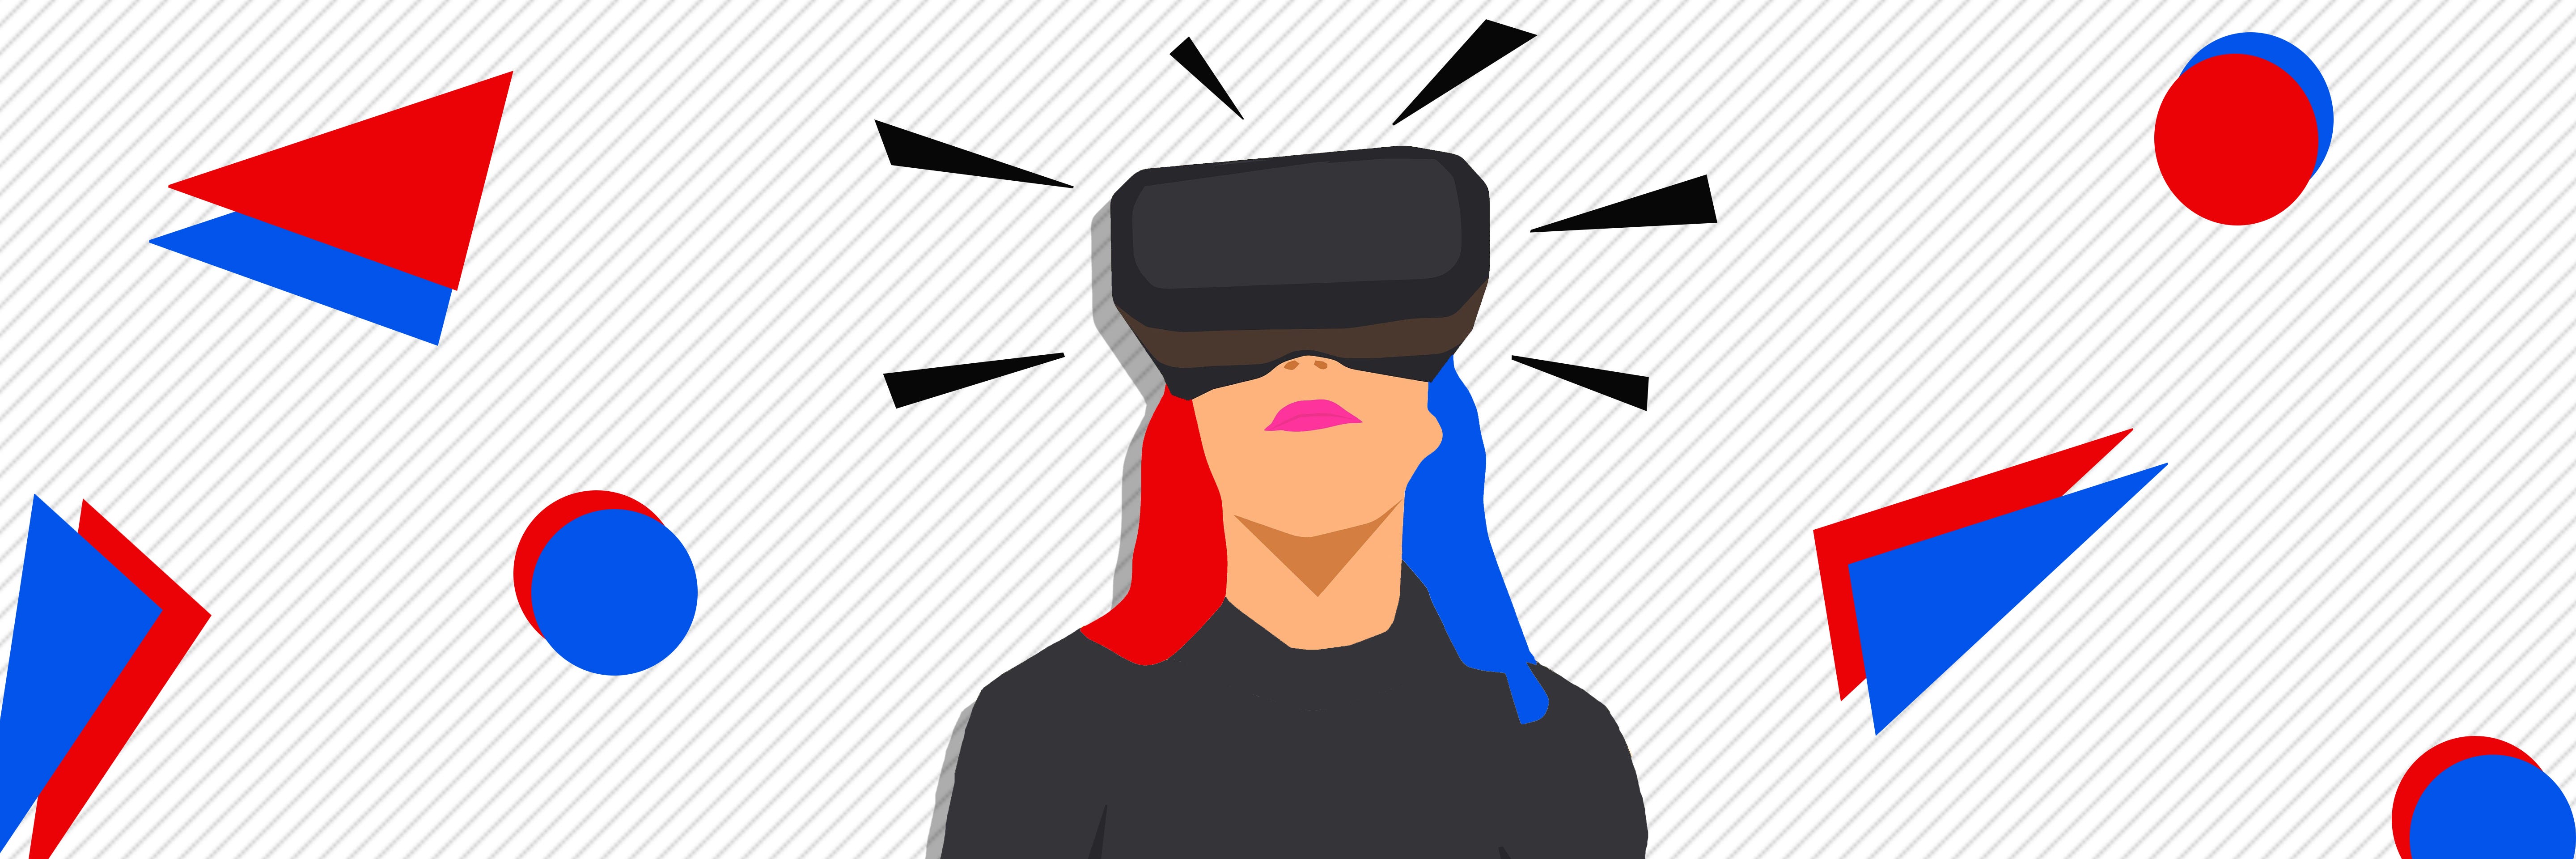 New-era AR, VR pop-ups: Enough to lure consumers in?